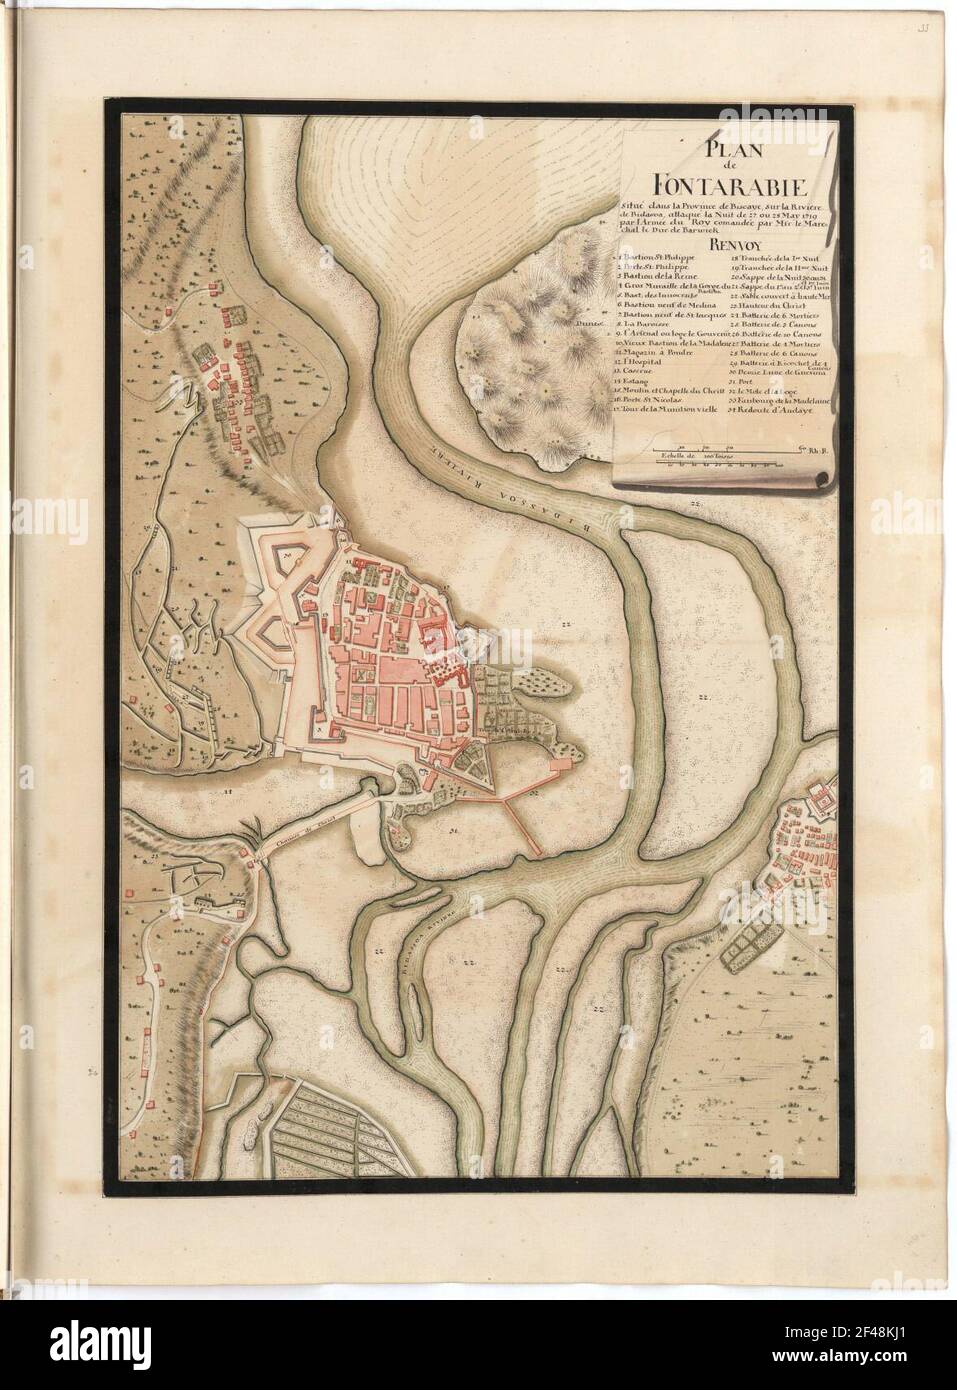 Plan de Fontarabie located in the province of Biscaye, on the Riviere de Bidasoa, attacks the night of 27. or 28. May 1719 by the army of the Roy Comandee by MSR: the Marechal The Duke of Barwick Stock Photo